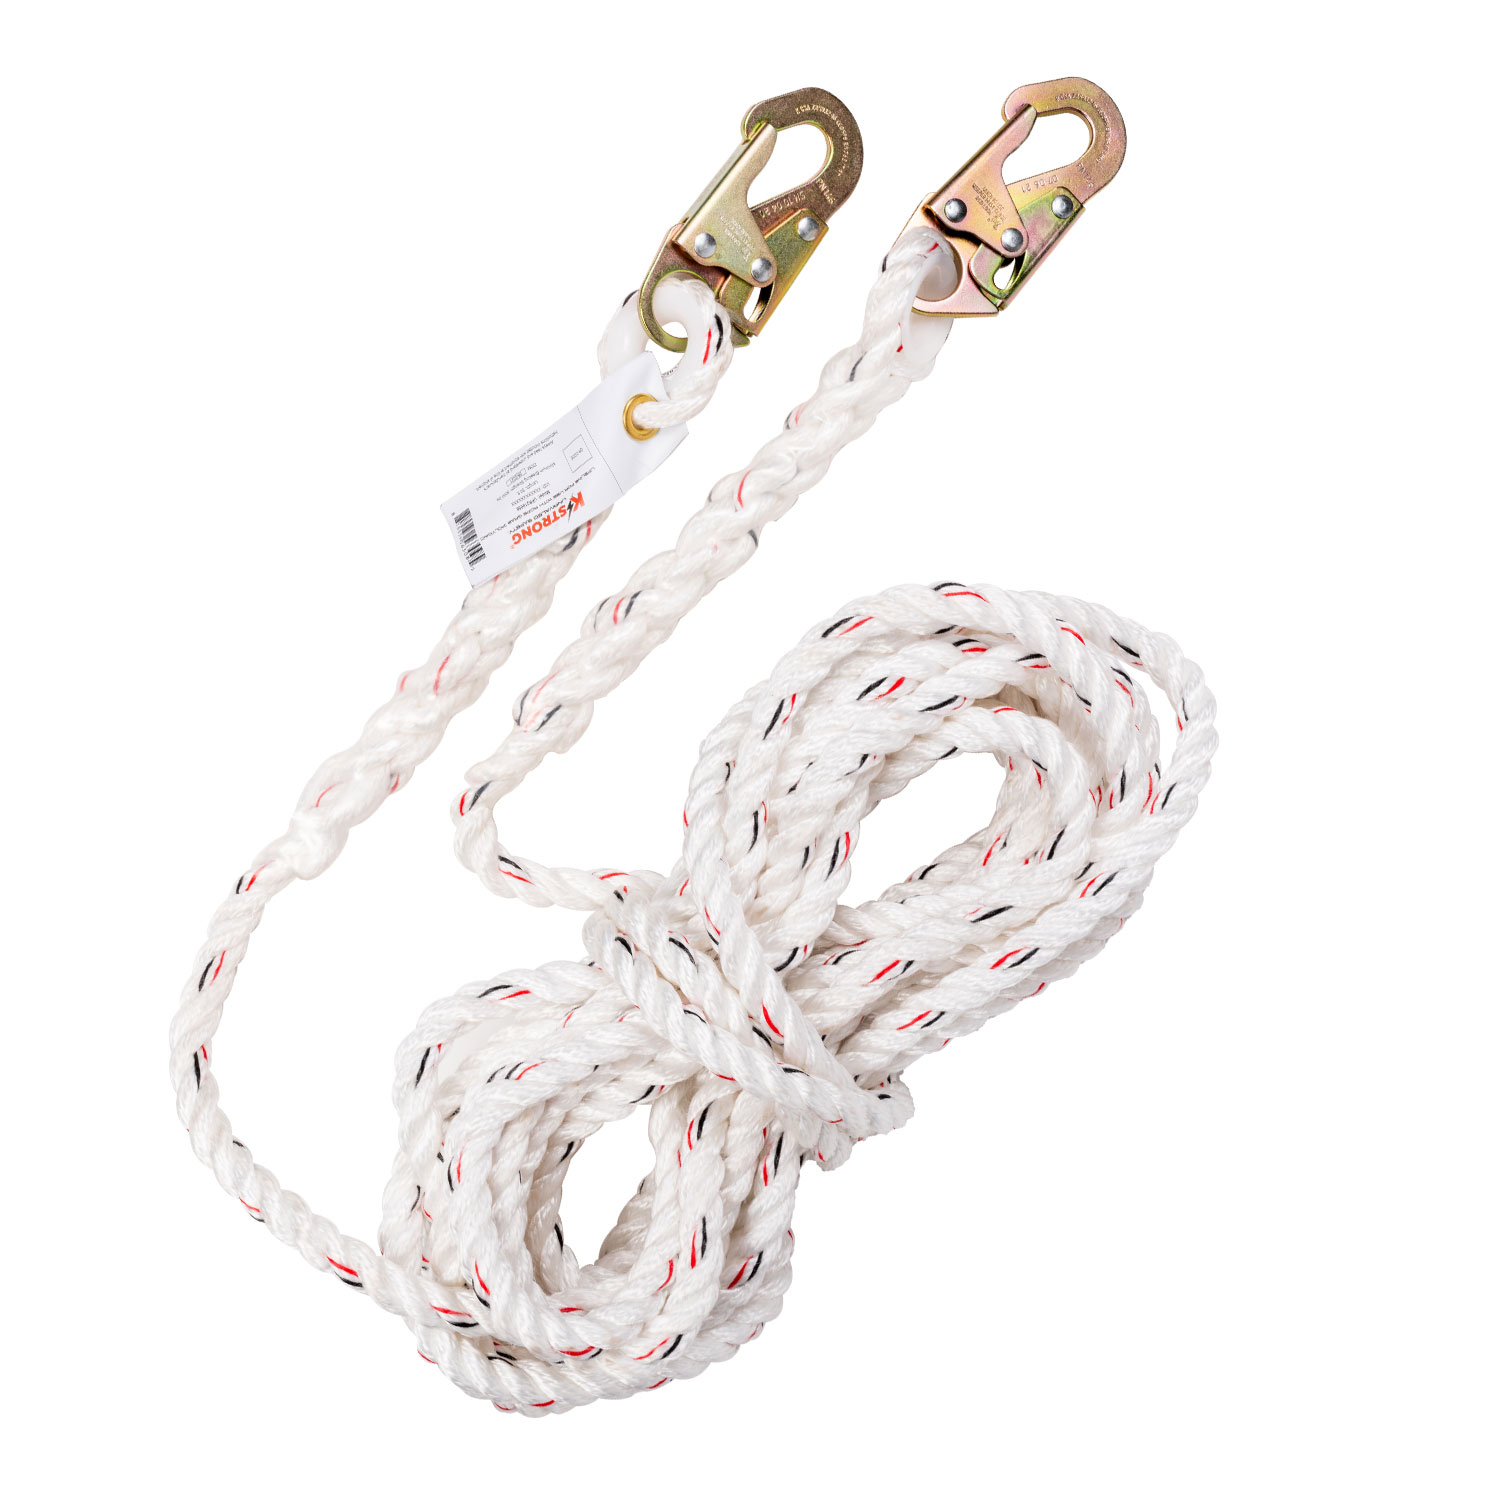 KStrong® 200 ft. Vertical White Polydac Rope Lifeline with Snap Hooks at  Both Ends - KStrong